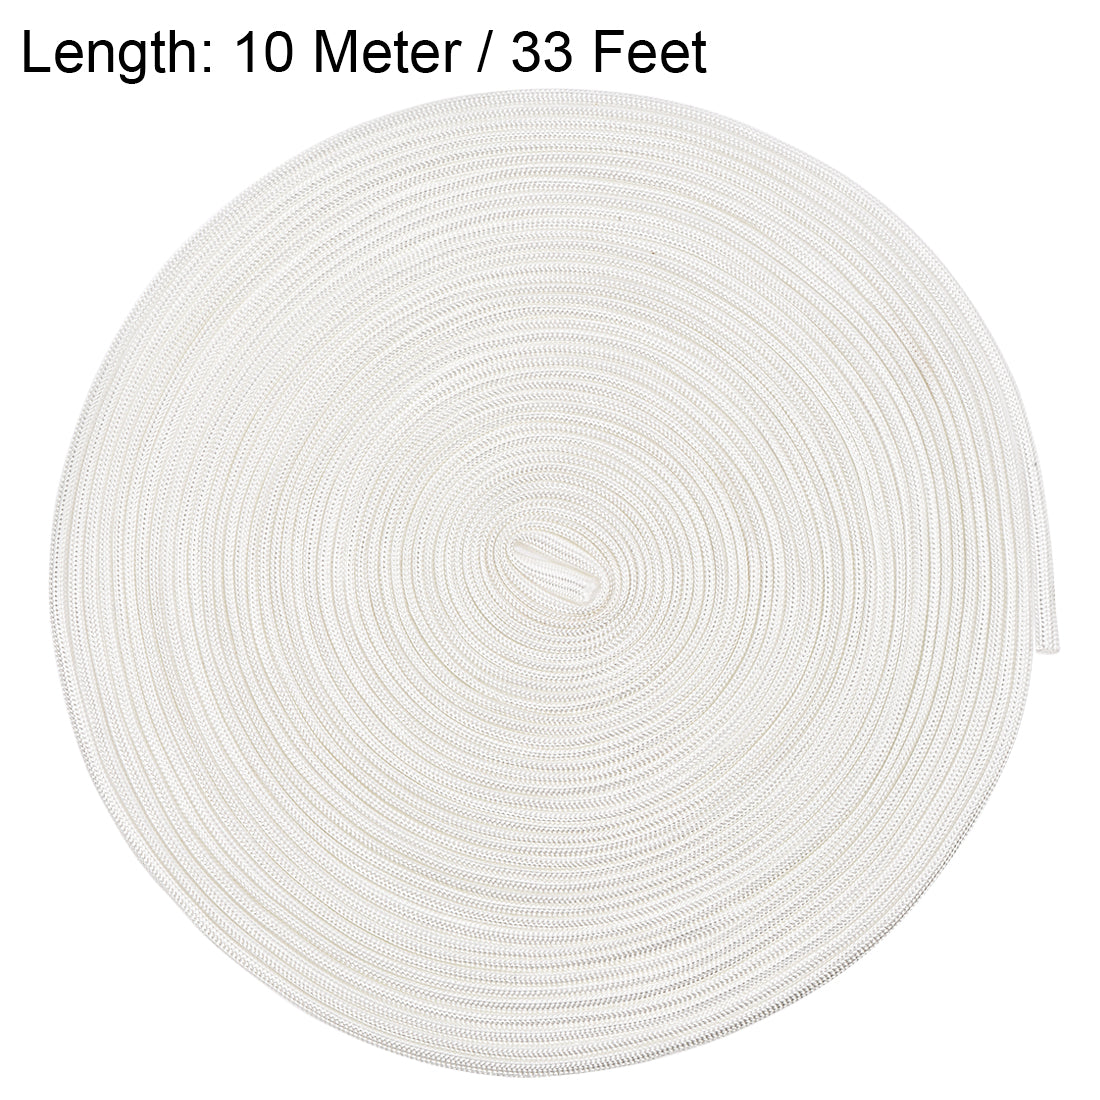 uxcell Uxcell Insulation Cable Protector, 33Ft-4mm High TEMP Fiberglass Sleeve White